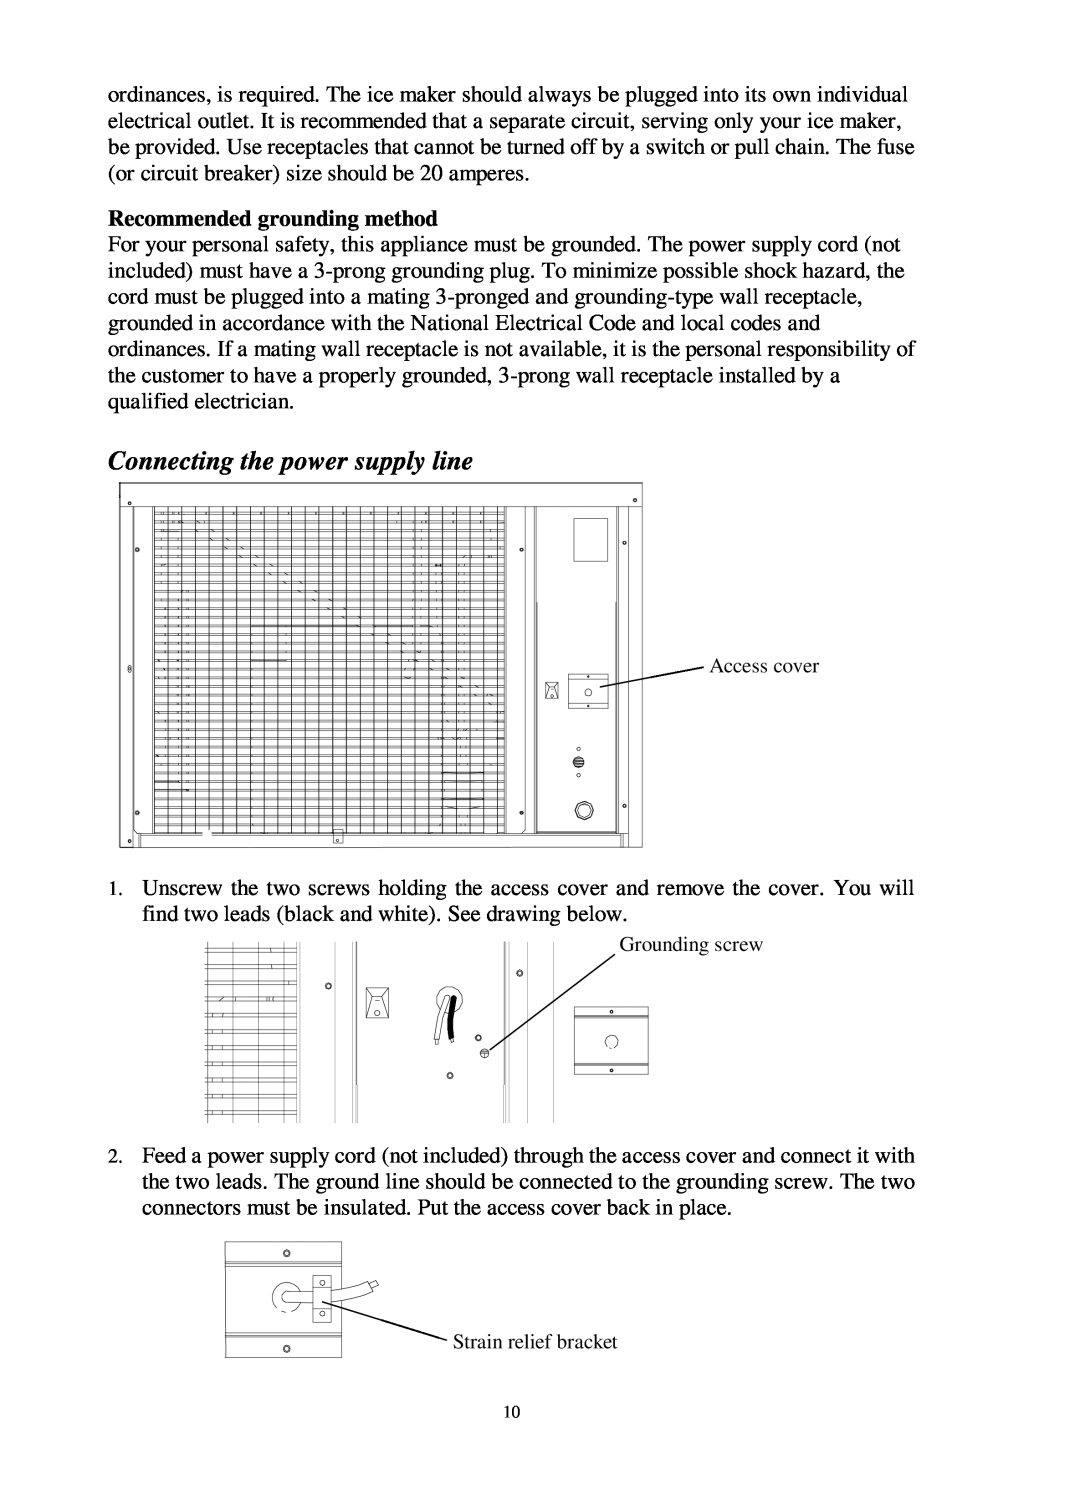 Franklin Industries, L.L.C FIM400 user manual Connecting the power supply line, Recommended grounding method 